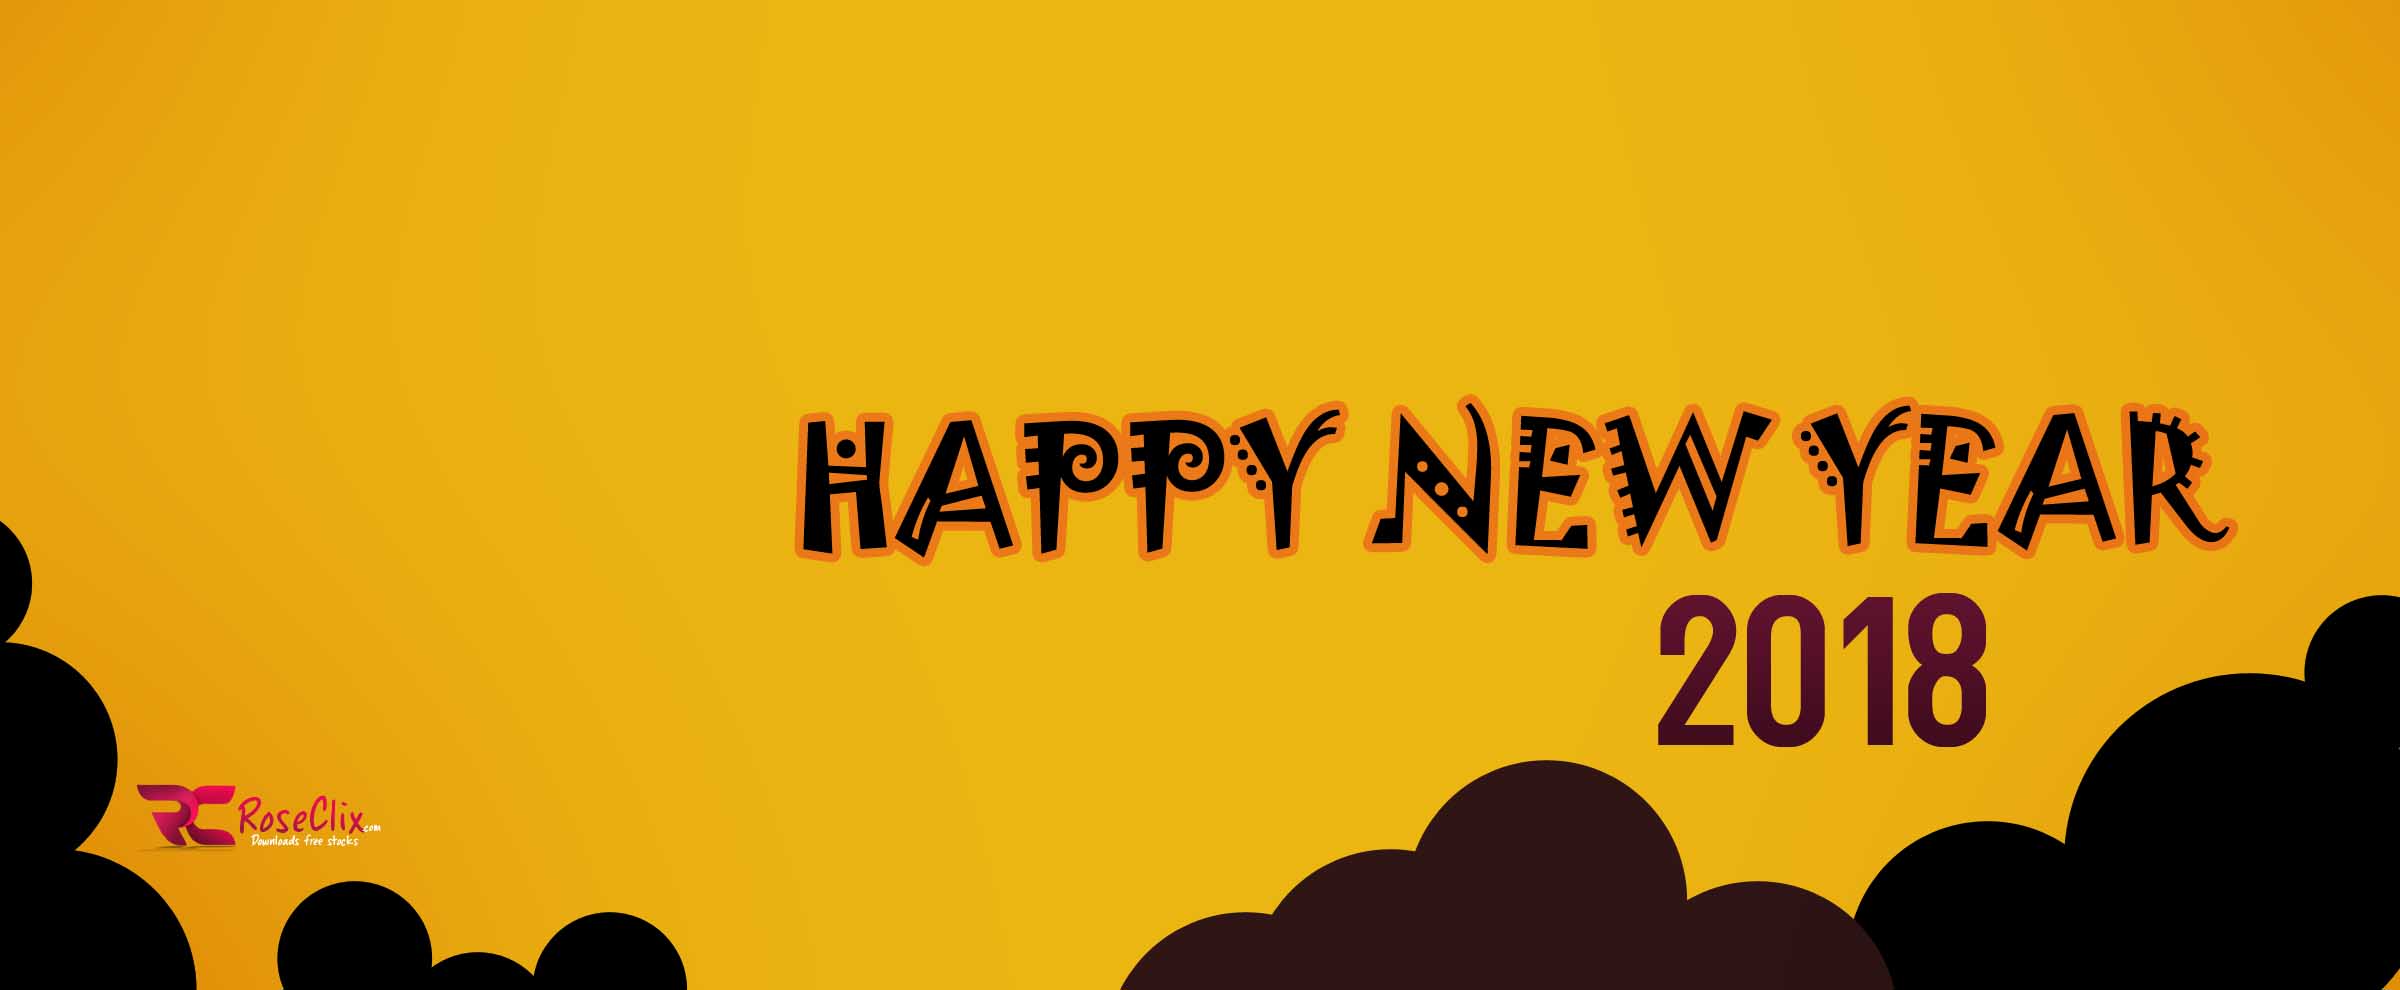 Happy New Year 2018 Facebook Timeline Cover Fb Cover